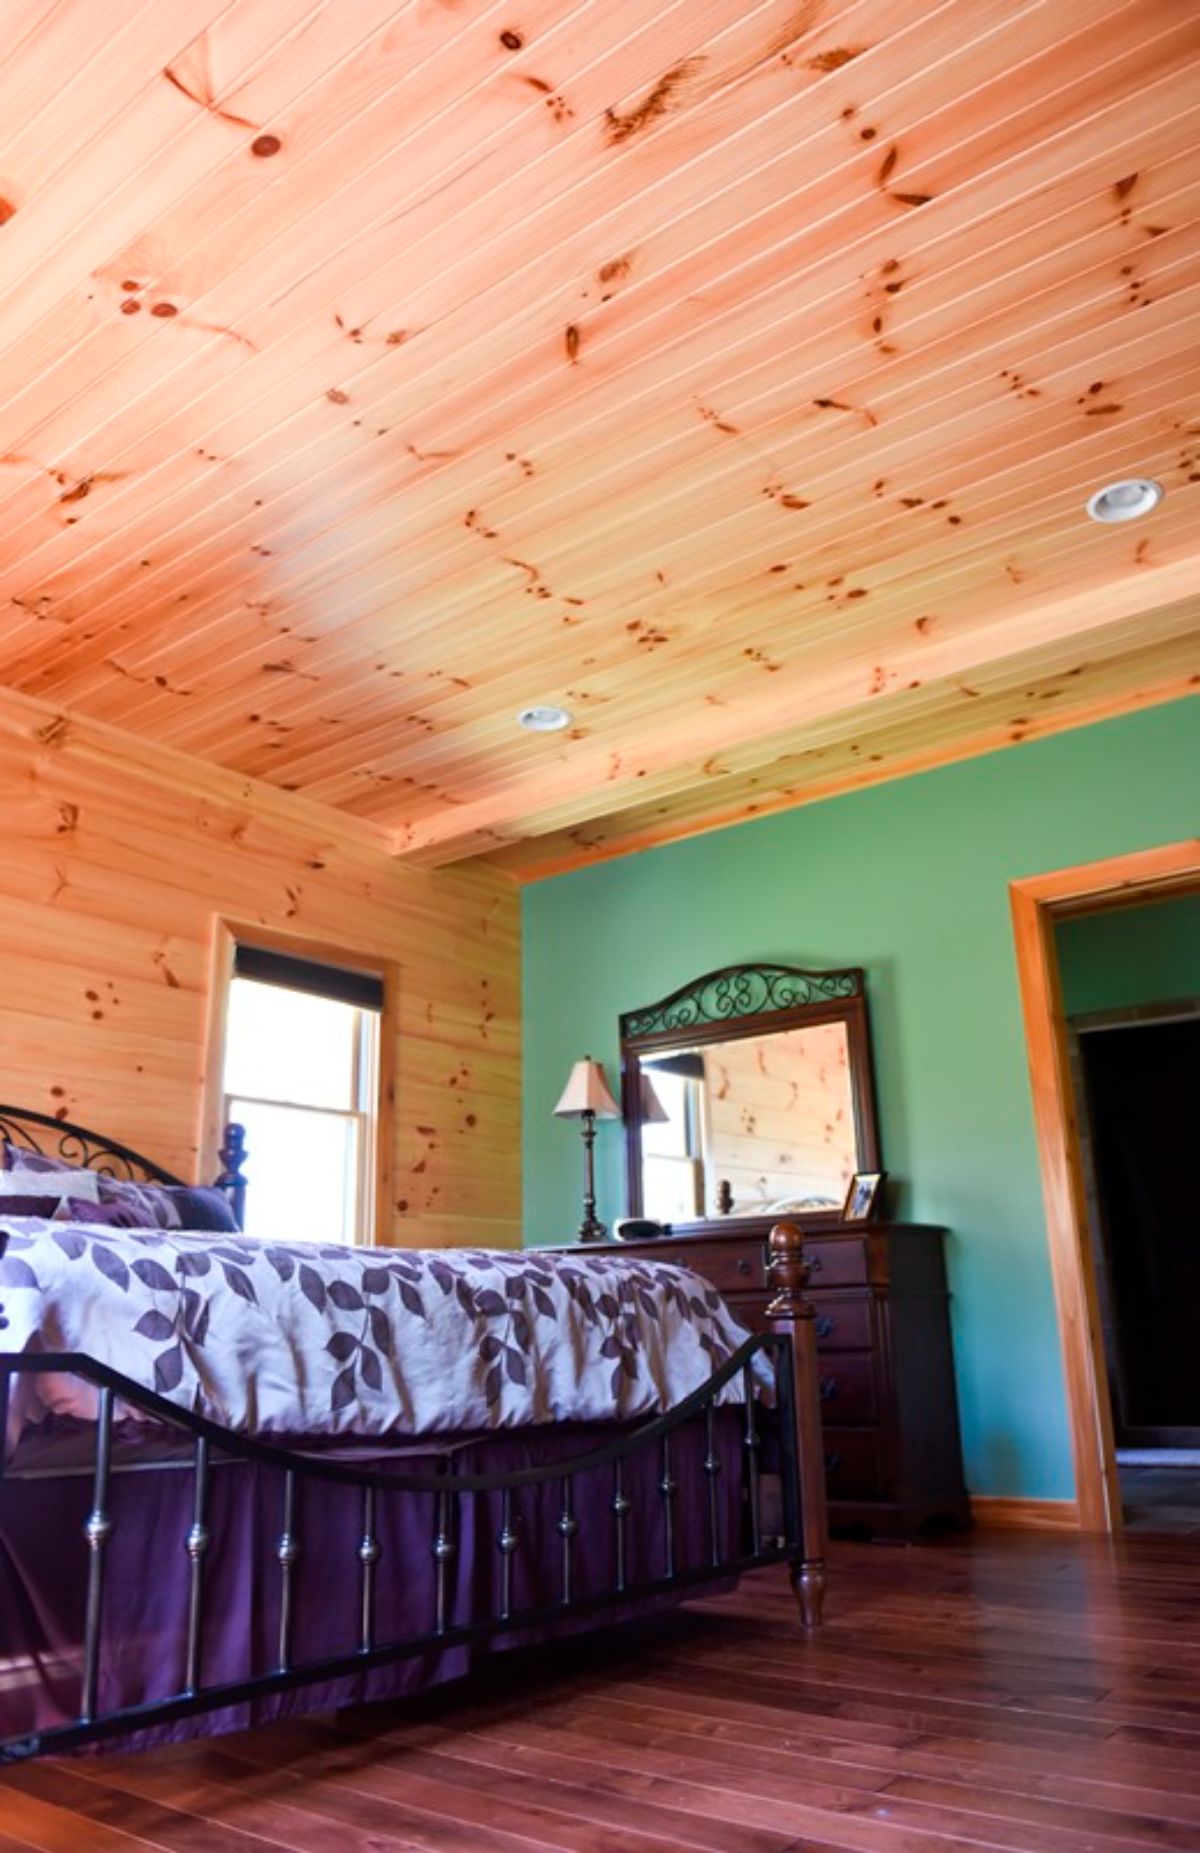 green wall in bedroom of log cabin with wood ceilings